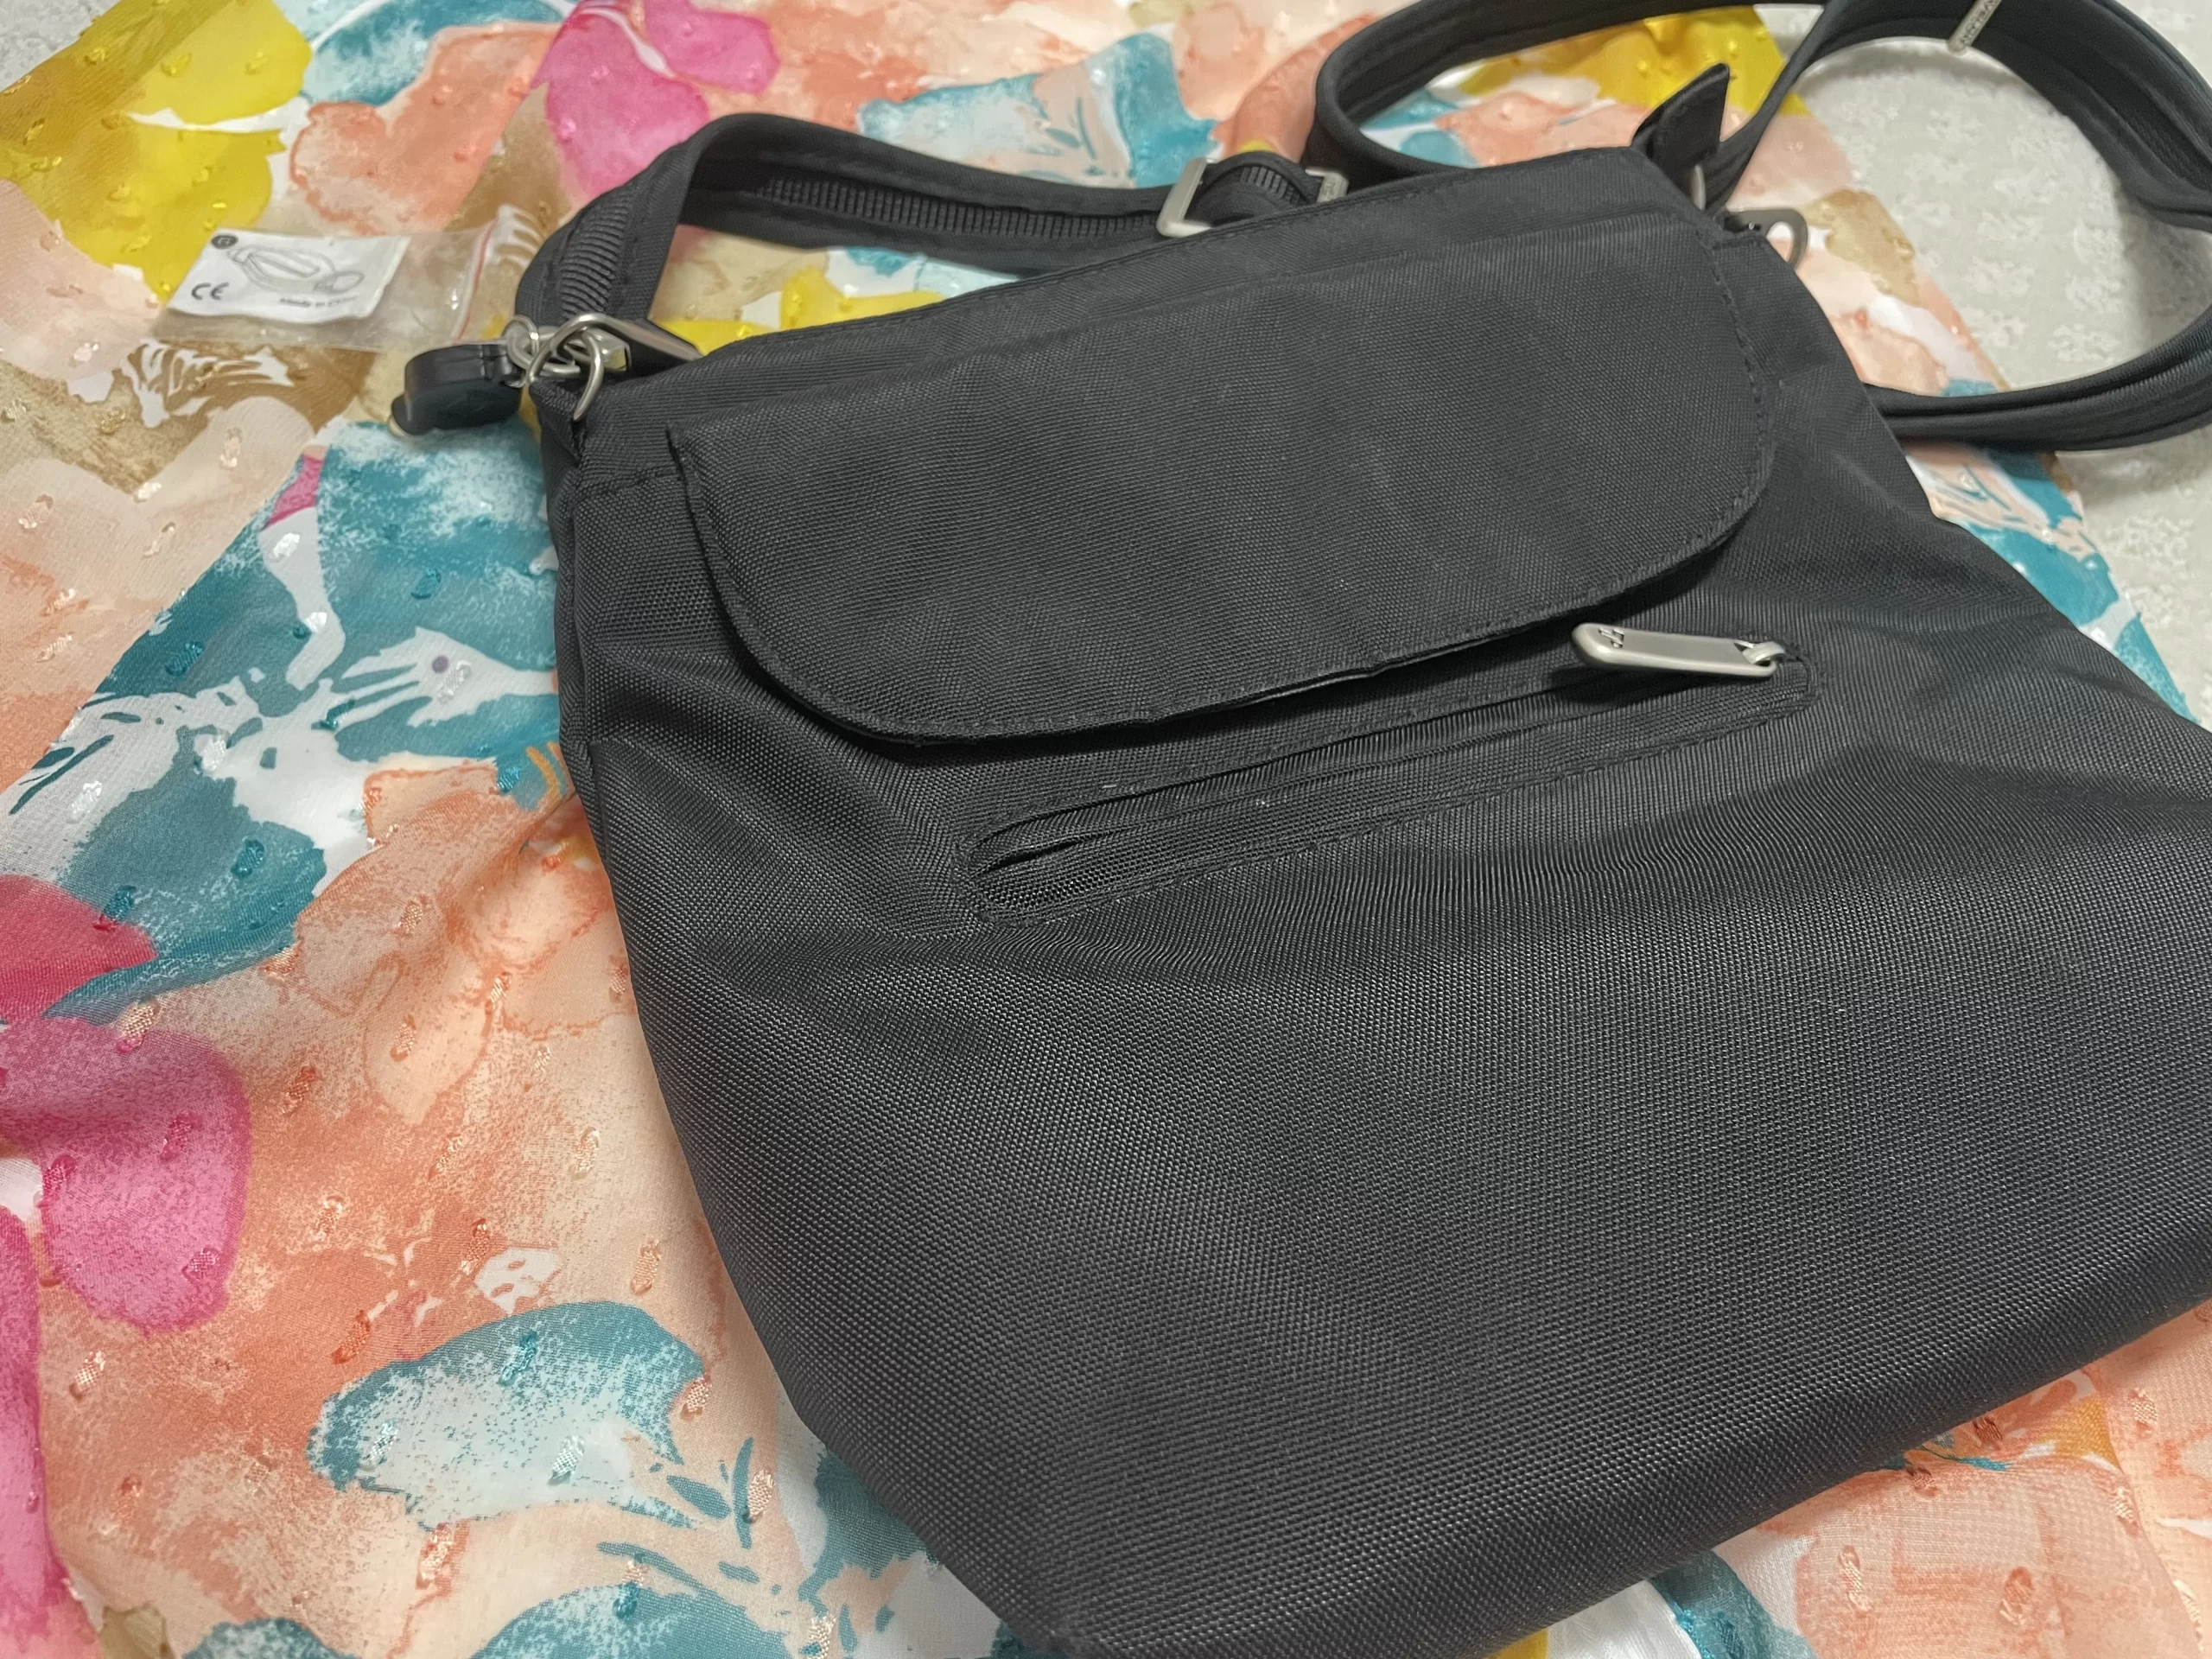 Best Purse for Travel A Travelon Purse Review